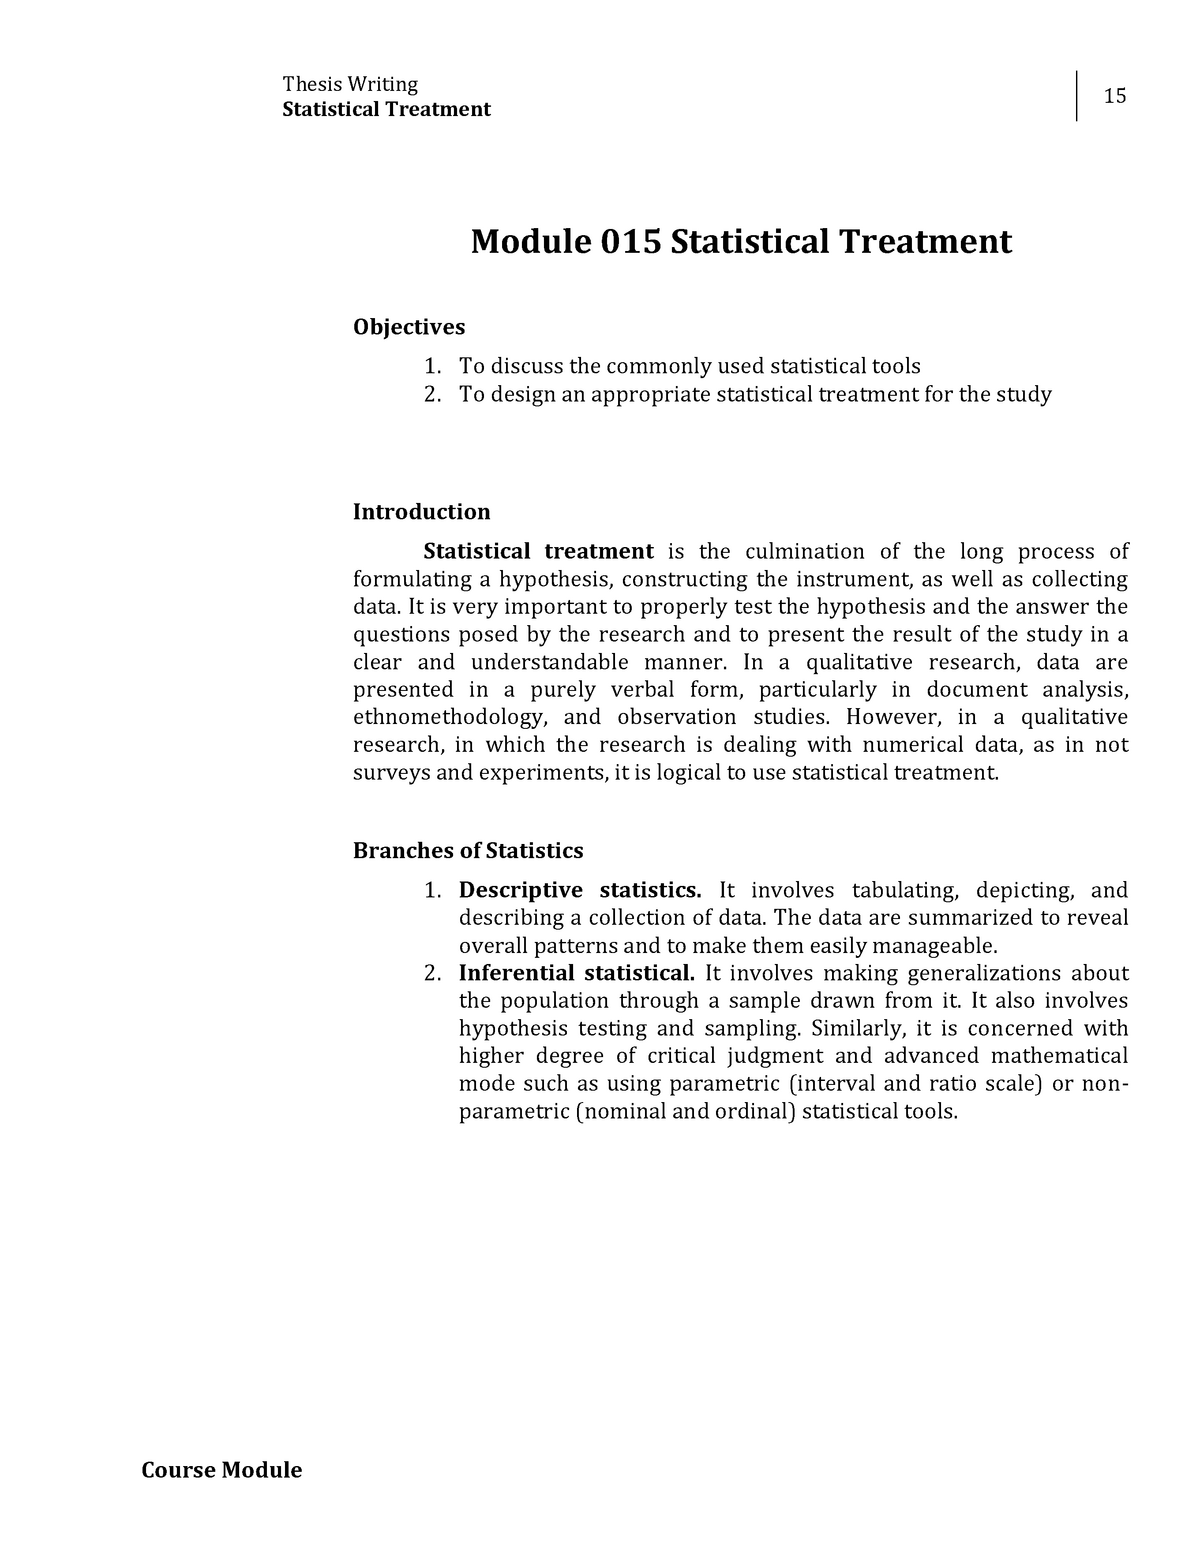 statistical treatment of research paper